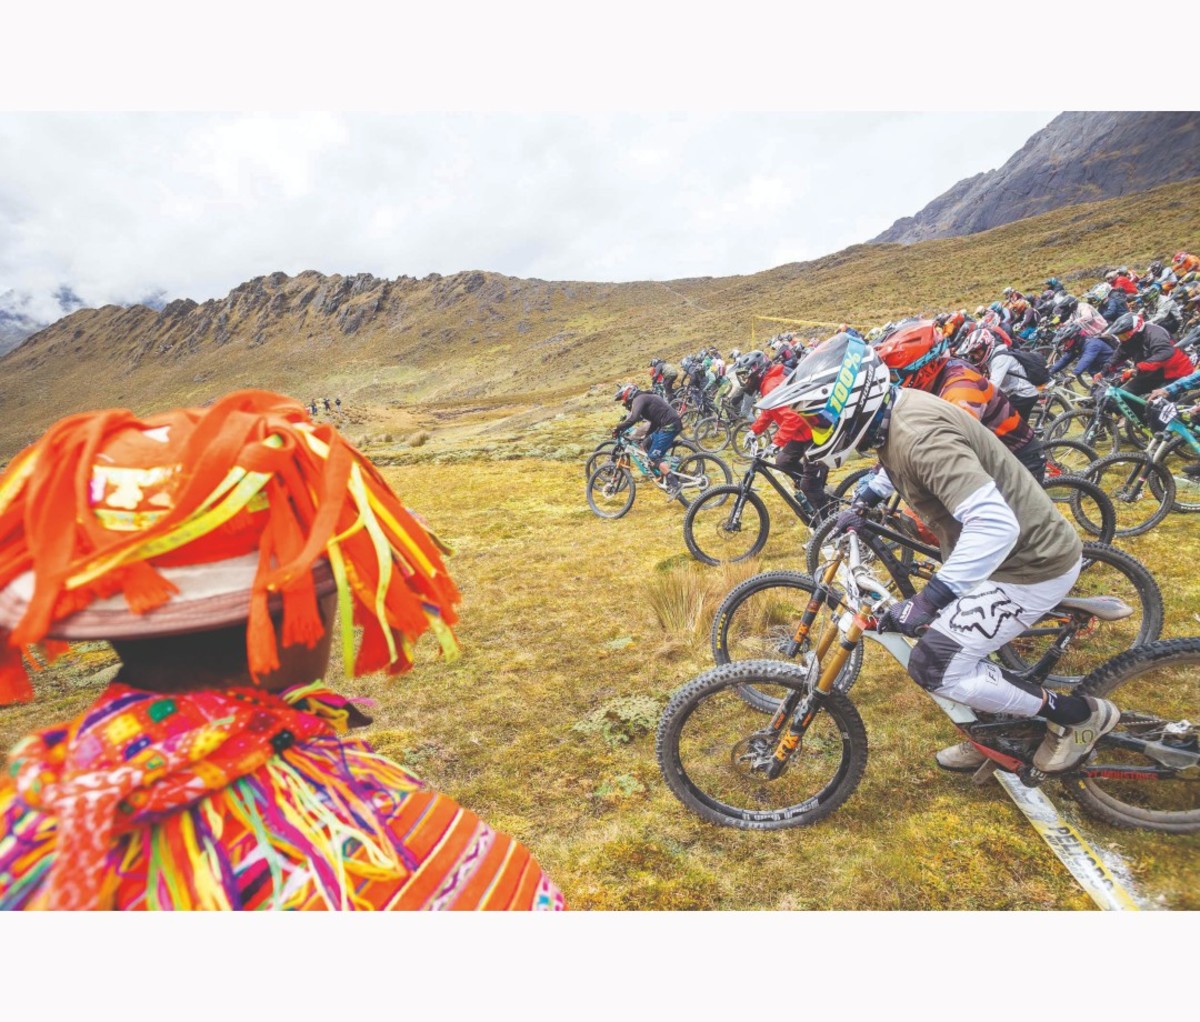 Mountain bikers line up on grass with person in traditional colorful Peruvian garb watches